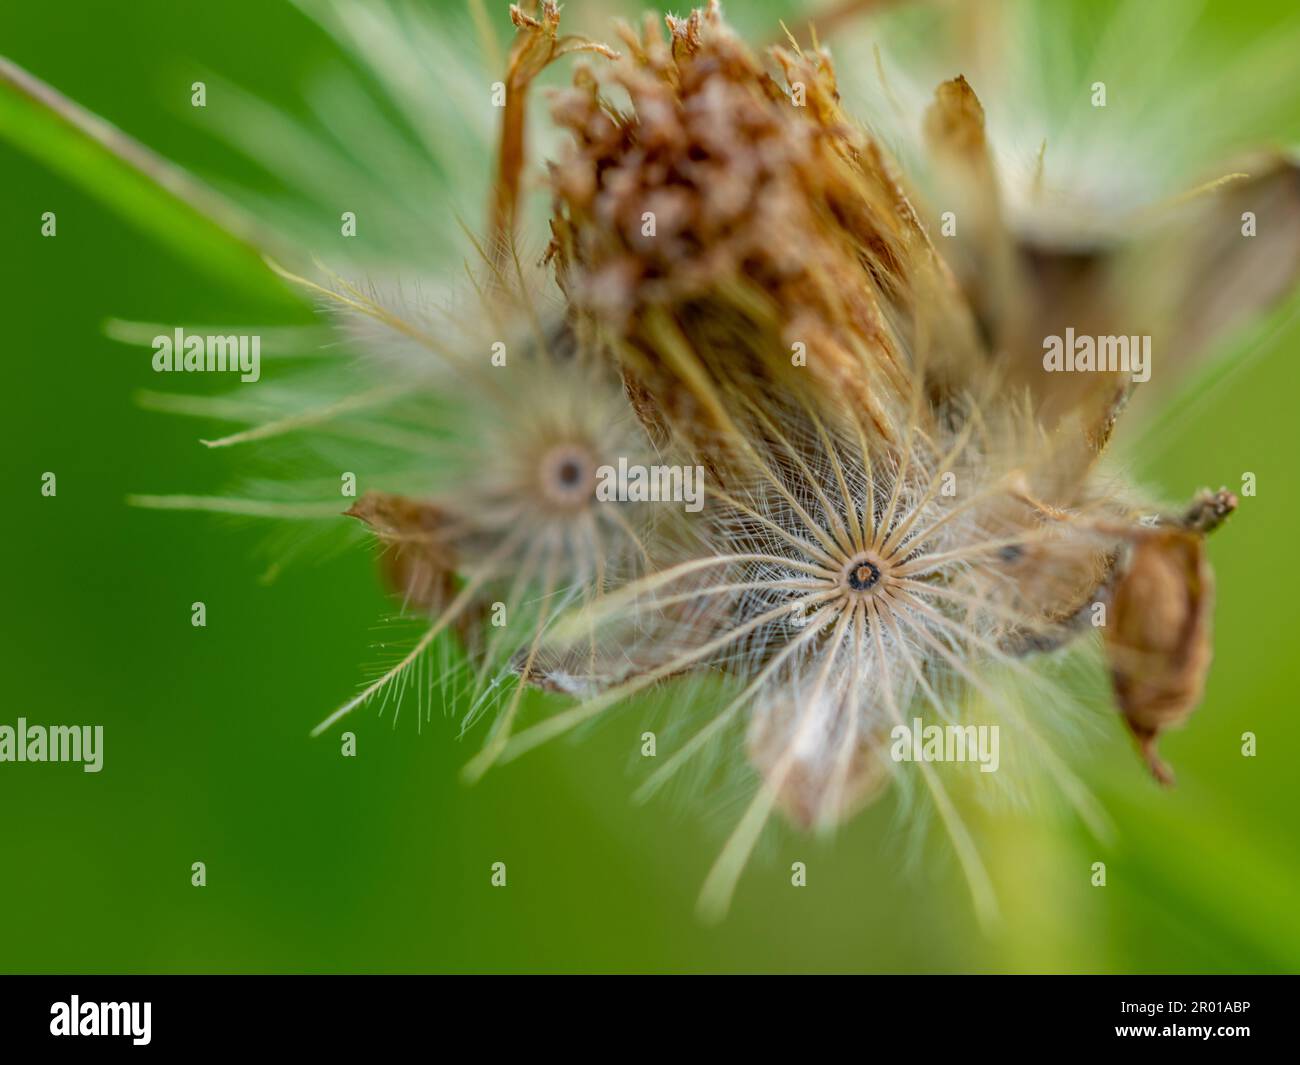 Close-up the seed of a Tridax Daisy flower when withering Stock Photo